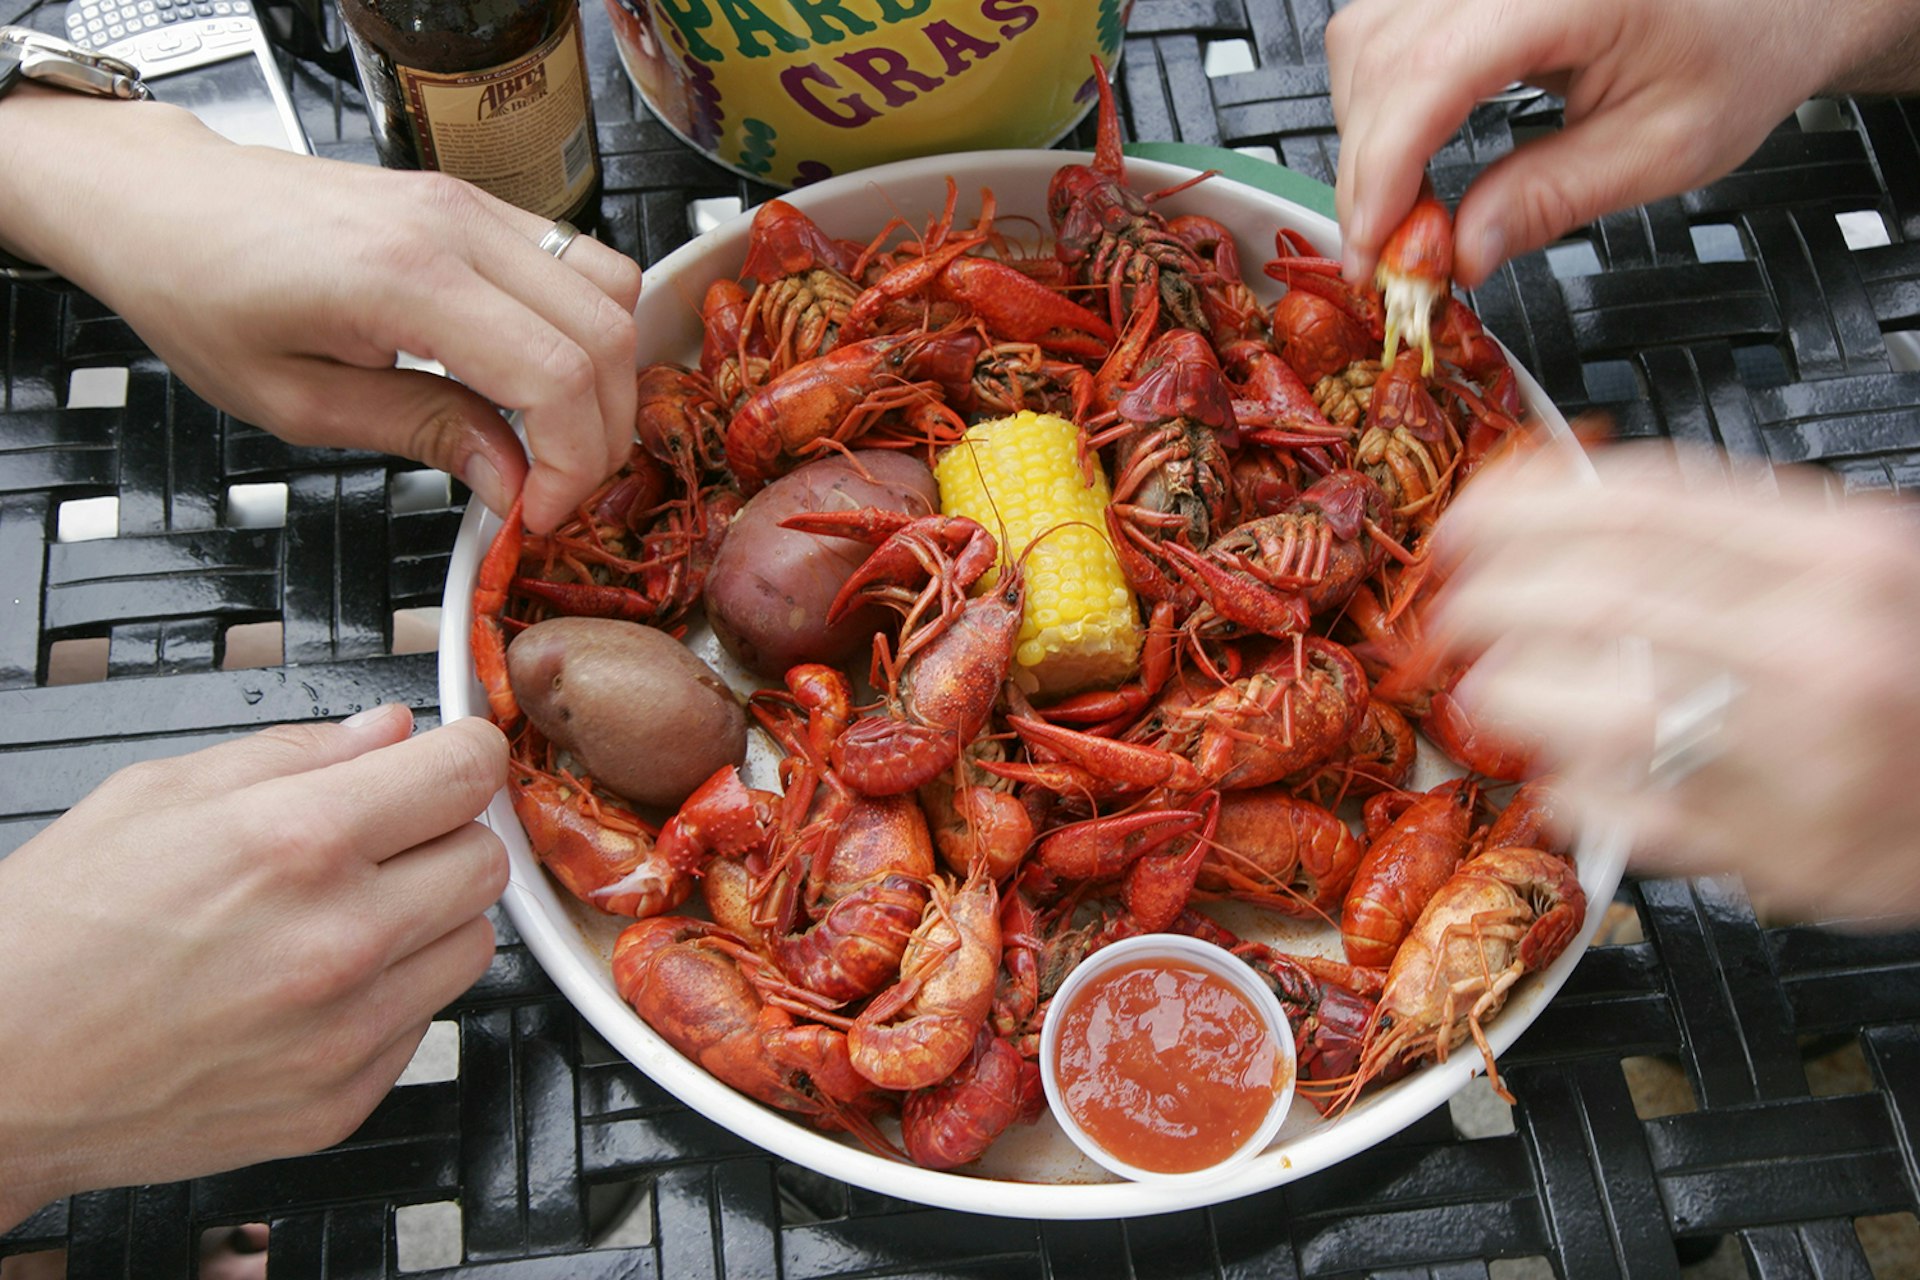 Hearty Southern classics: a plate of boiled seasoned crayfish in Birmingham, Alabama © Jeff Greenberg / Getty Image